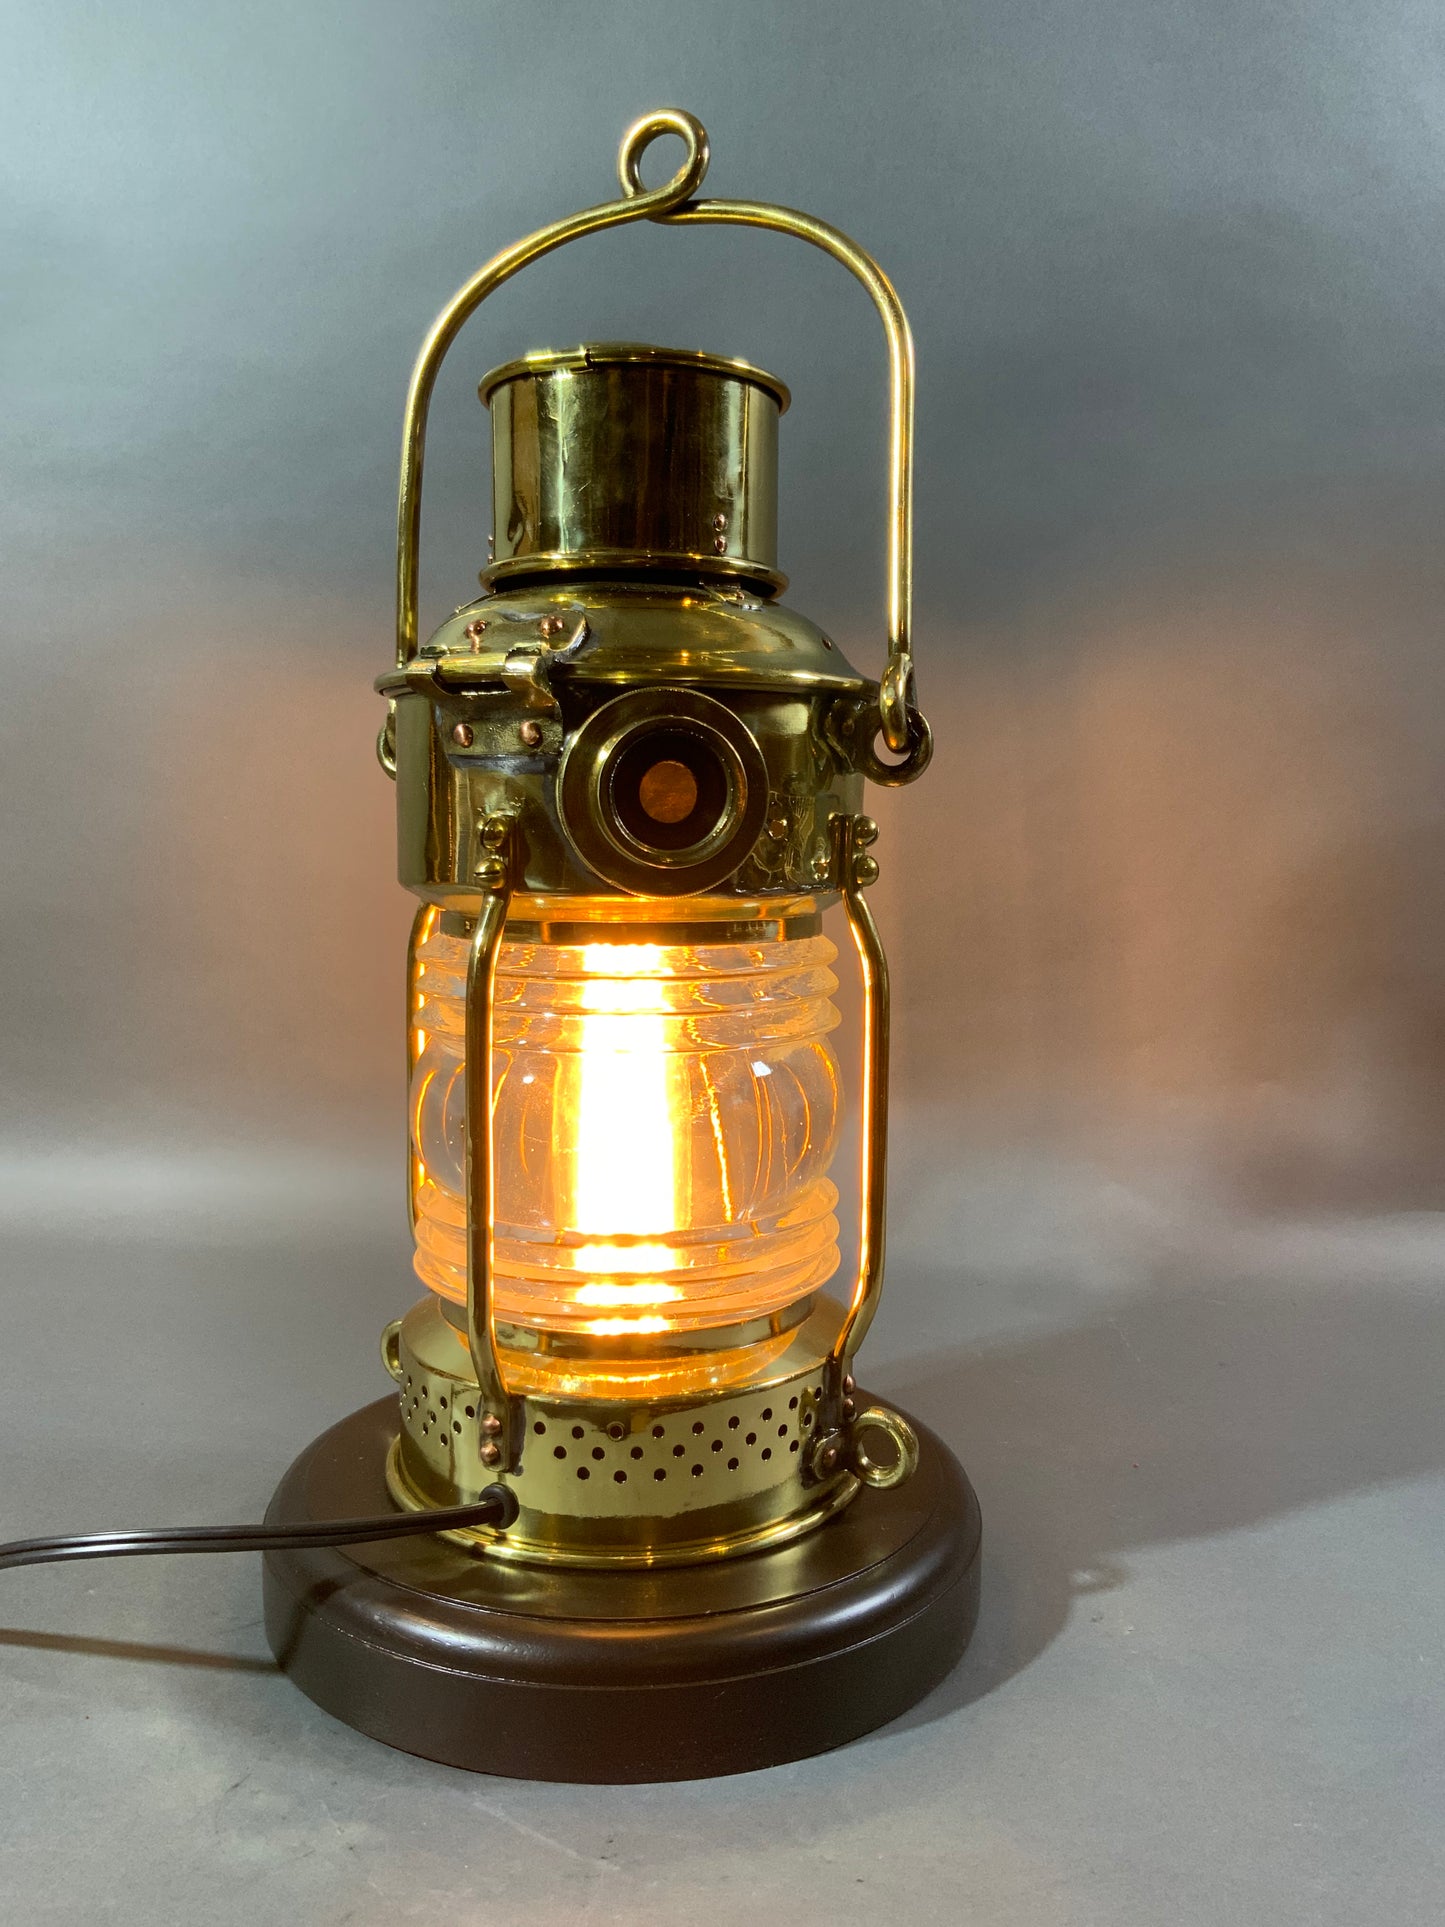 Antique Ships Anchor Lantern by French Maker - Lannan Gallery